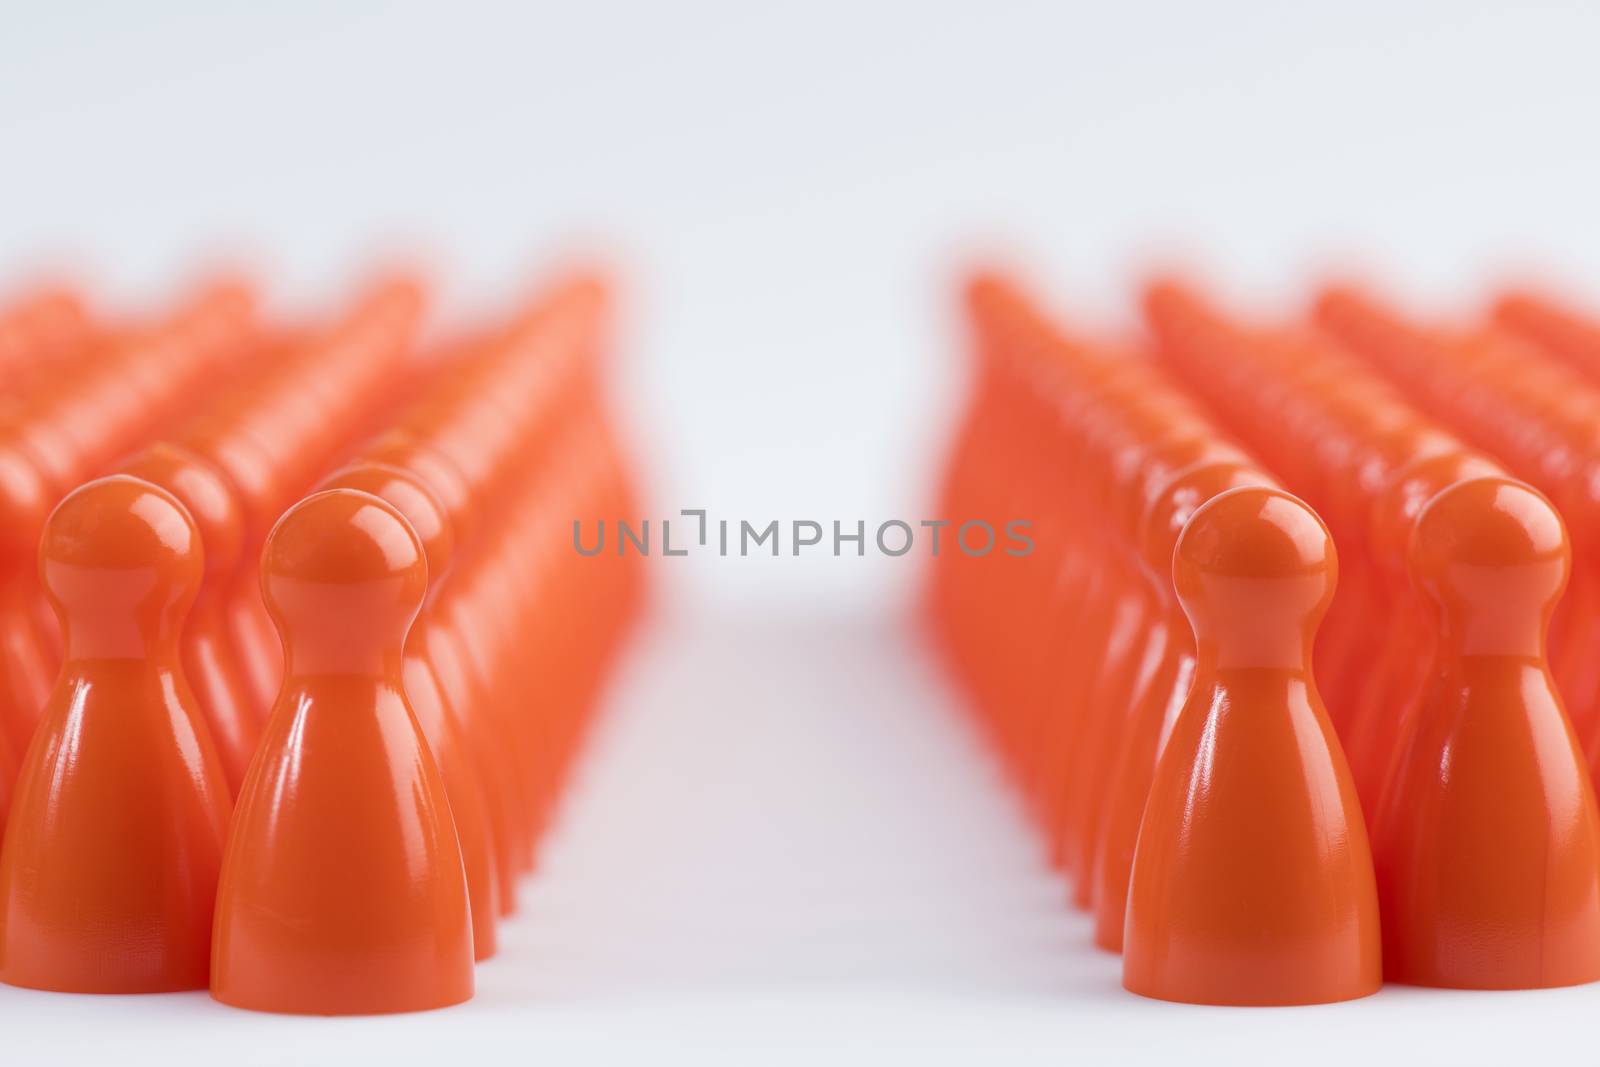 Conceptual orange game pawns as abstract view of a crowd
